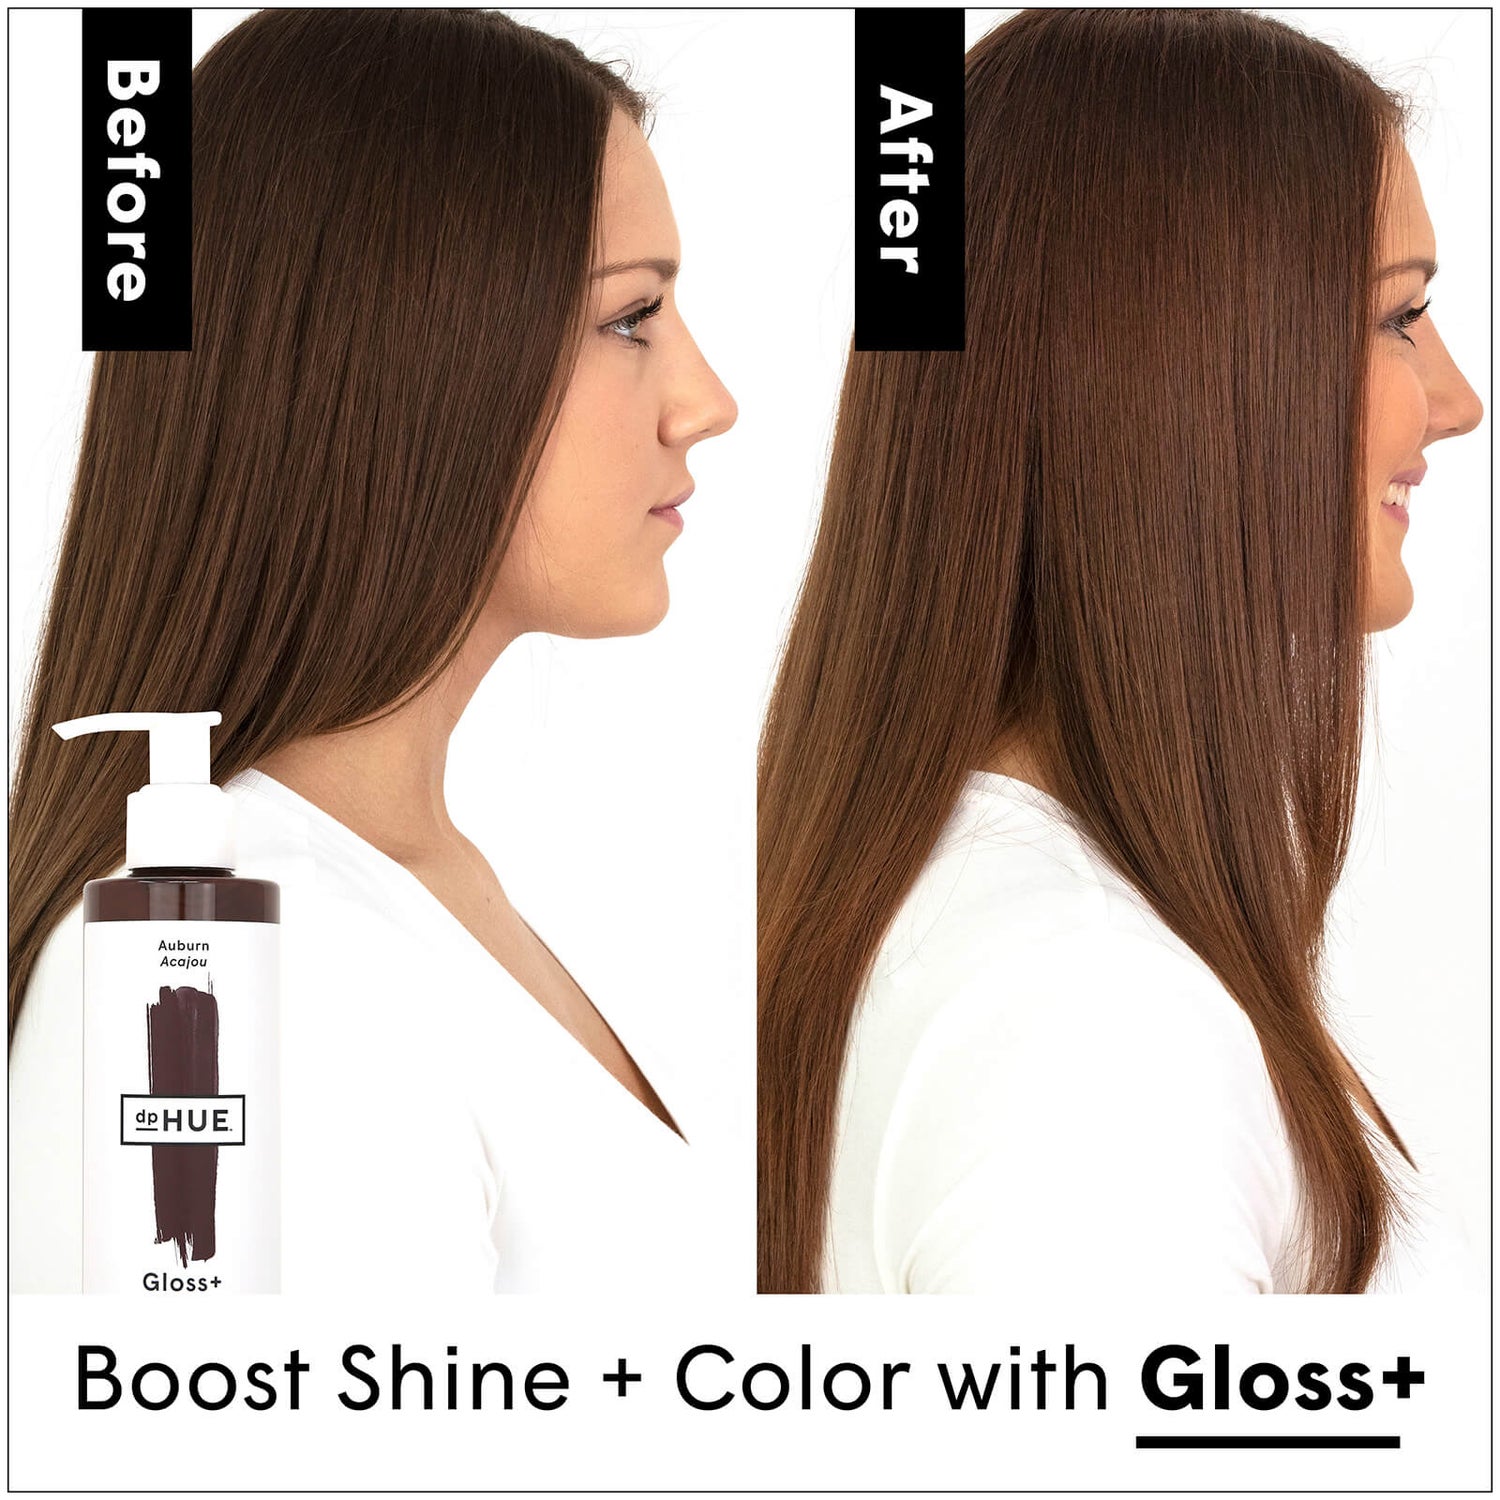 What is a Hair Gloss Treament? Best Hair Glosses and Glazes 2022